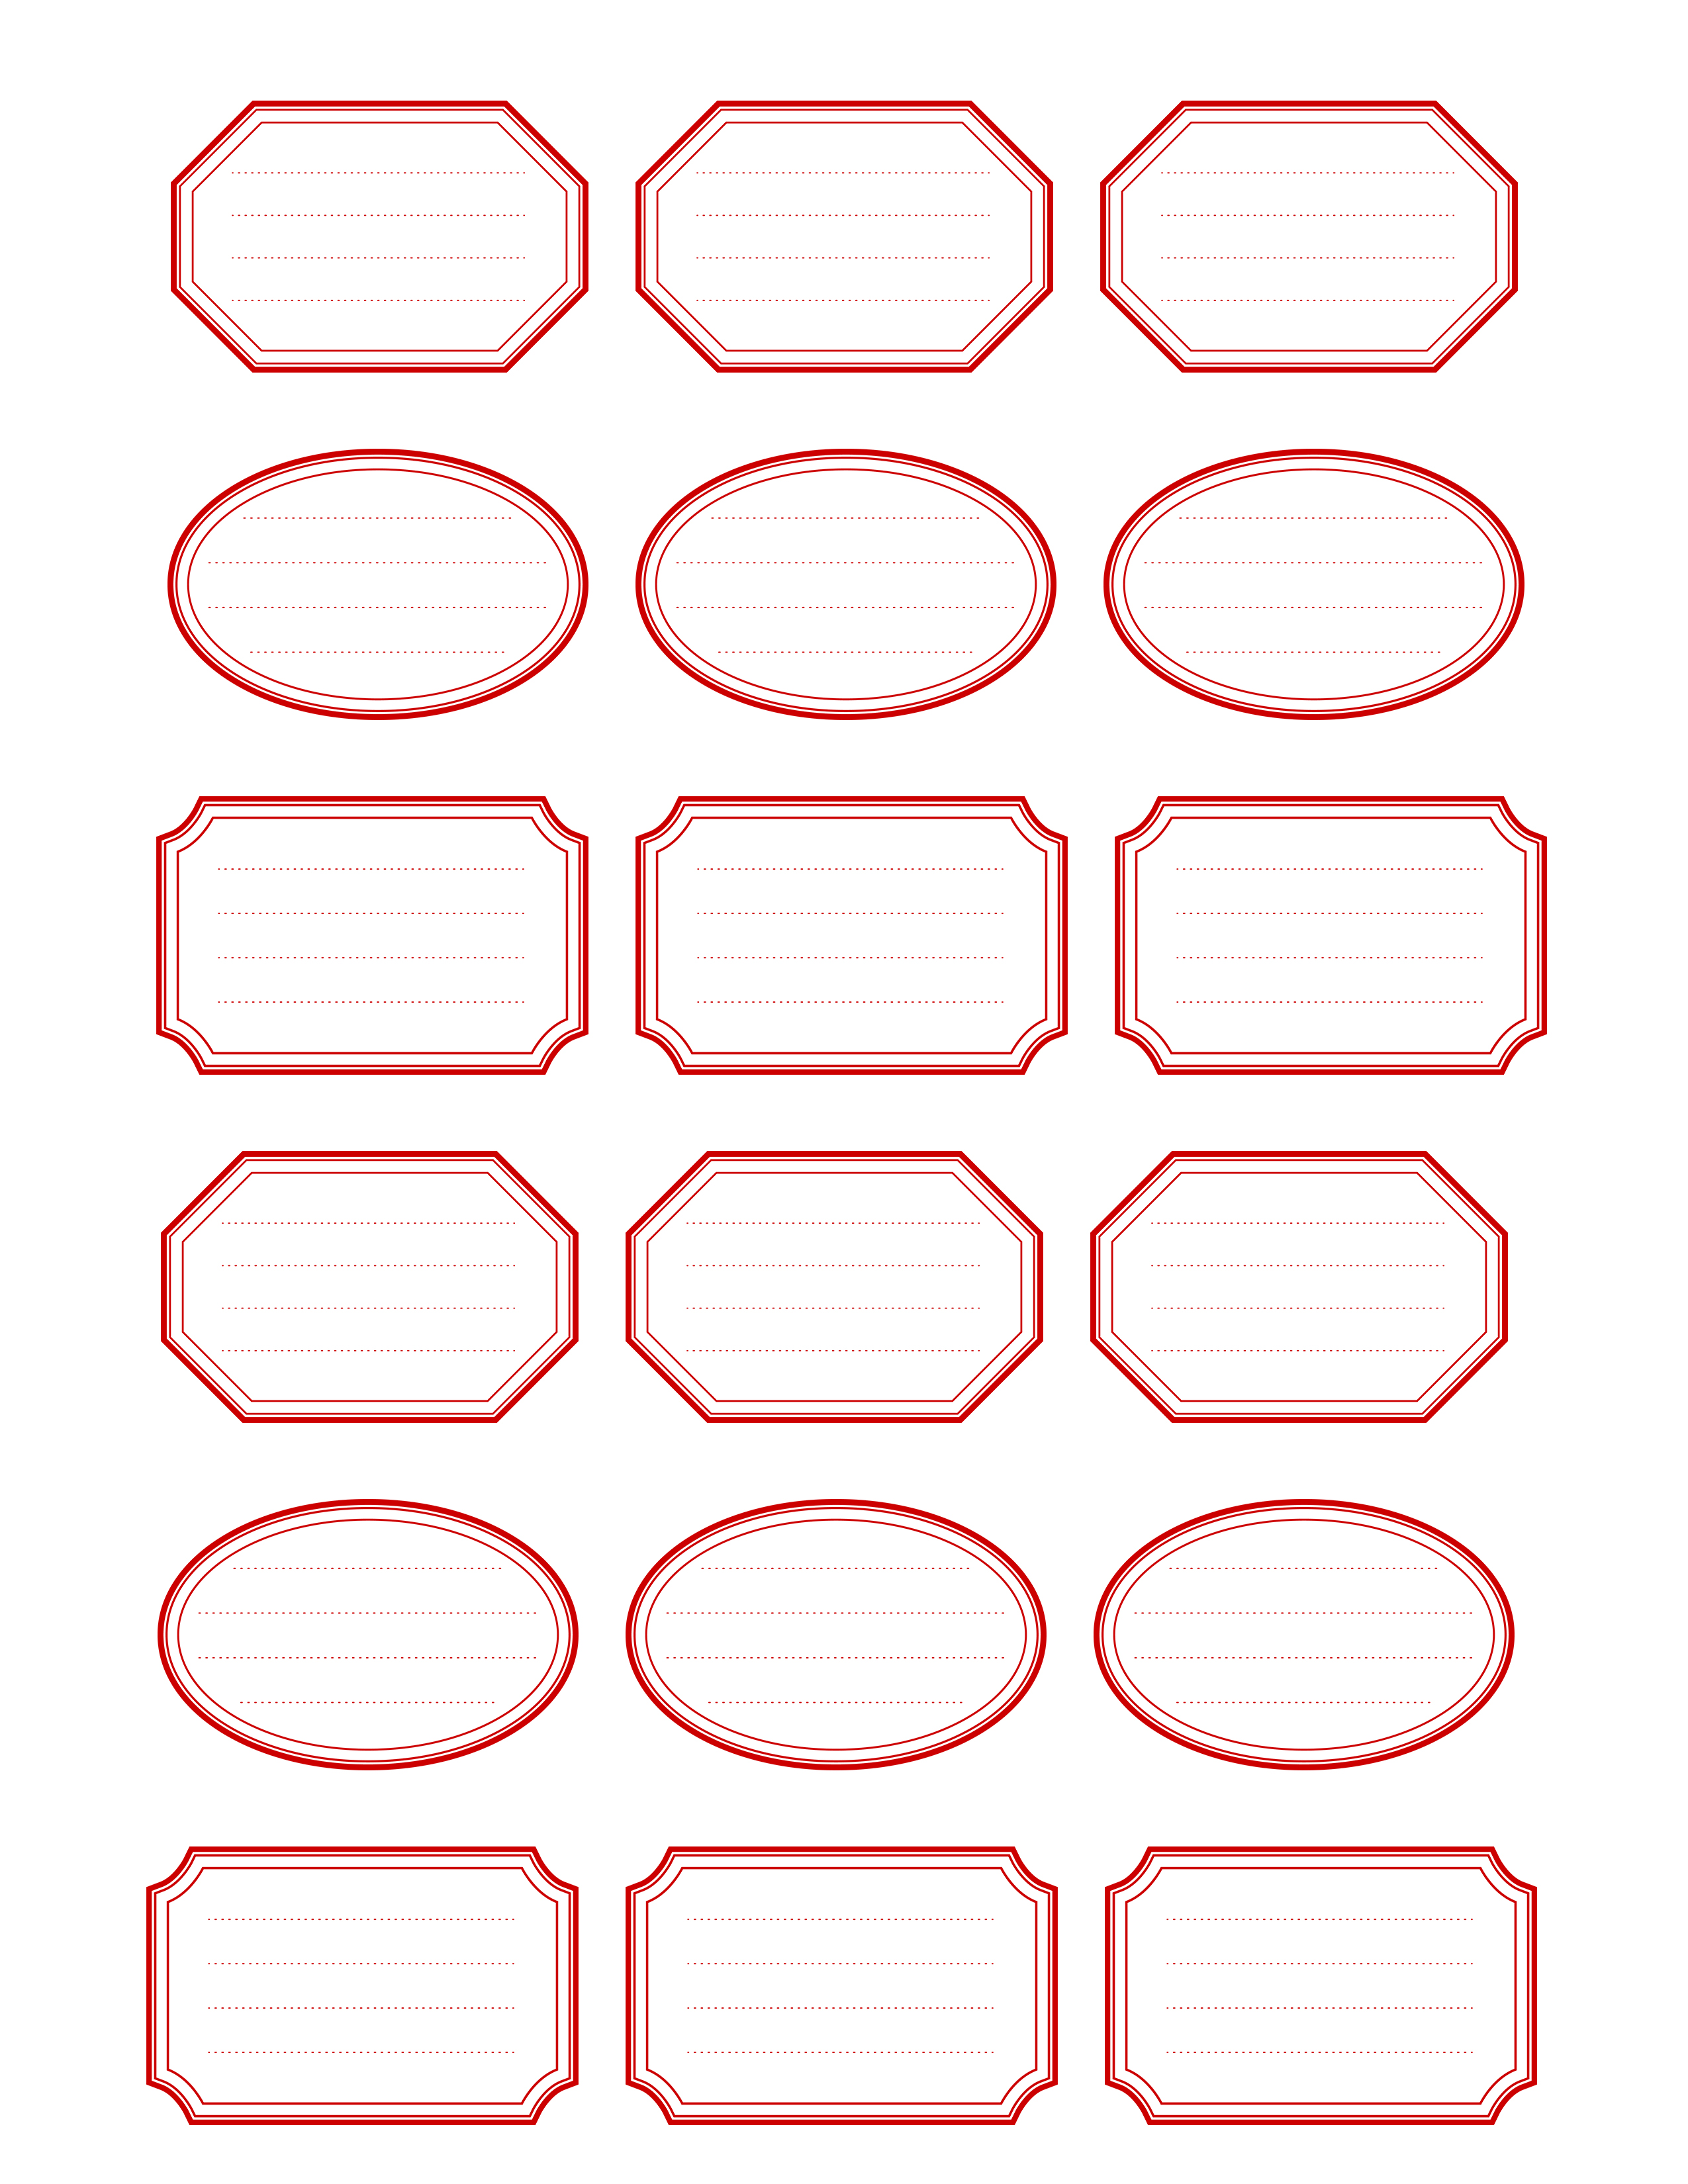 7 Best Images Of Free Printable Labels 1 Oval Label Free Printables Free Printable Labels And 